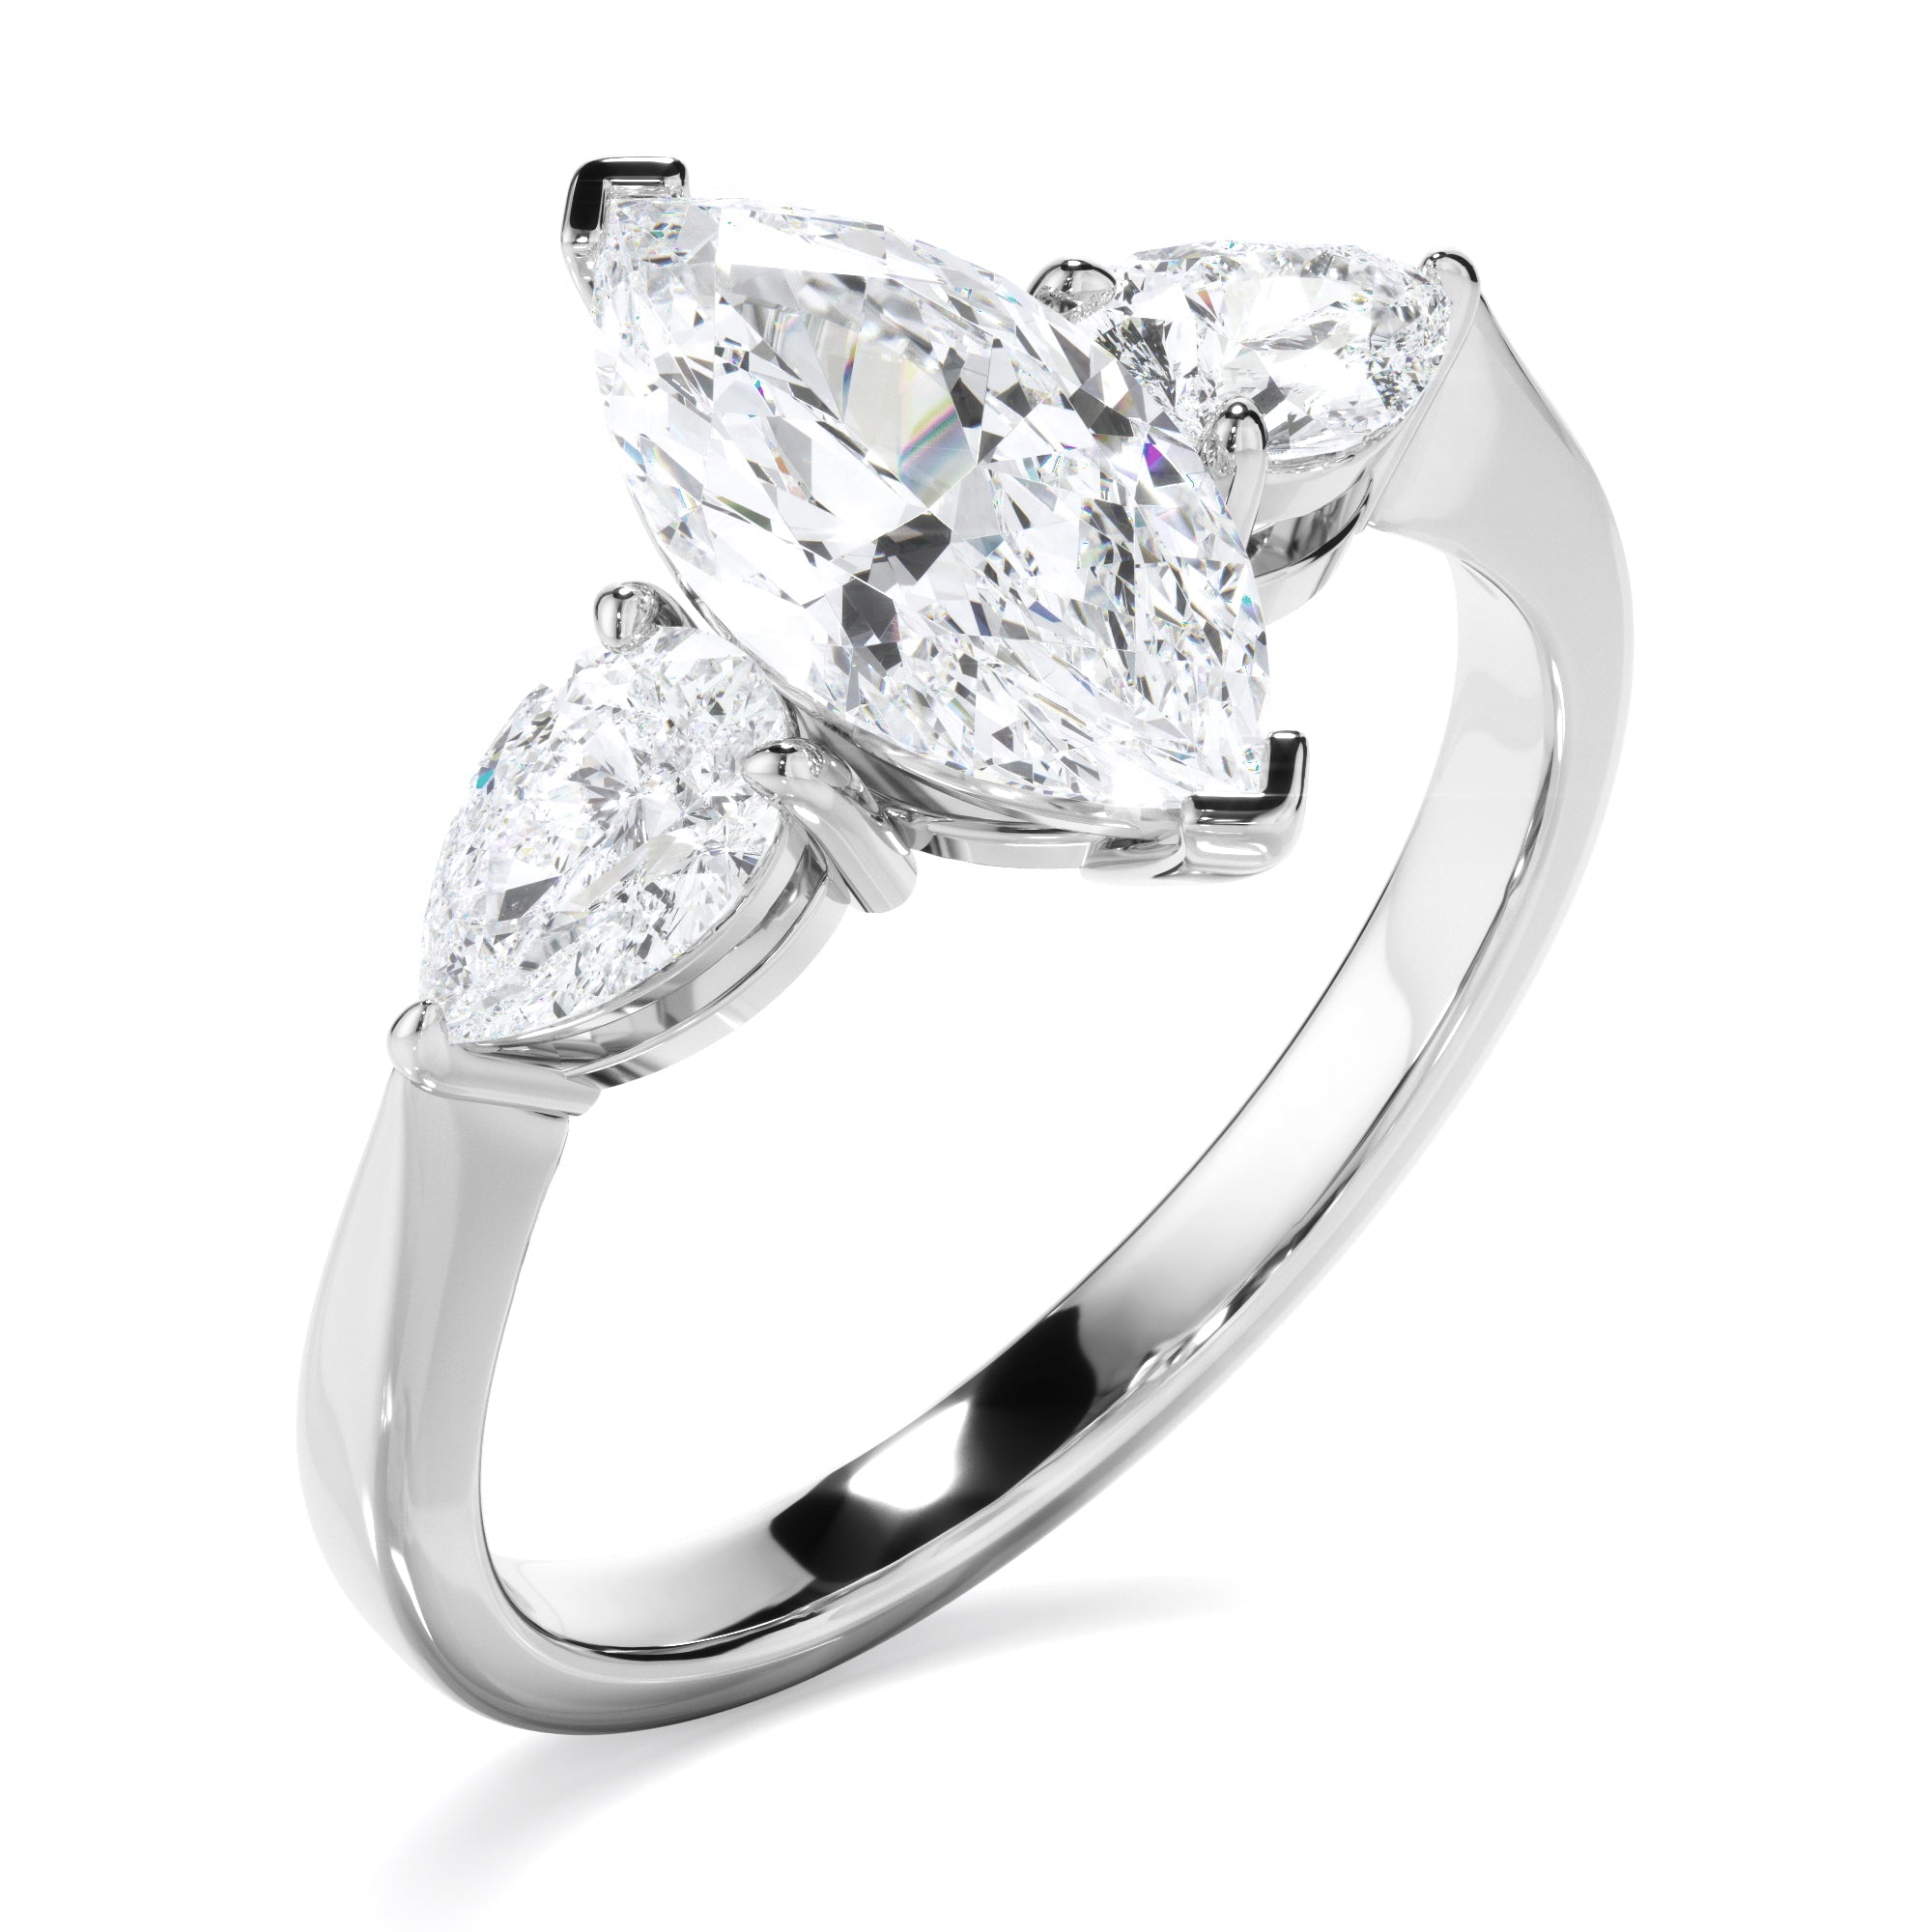 Marquise Cut Diamond Engagement Ring With Pear Cut Diamond Sides